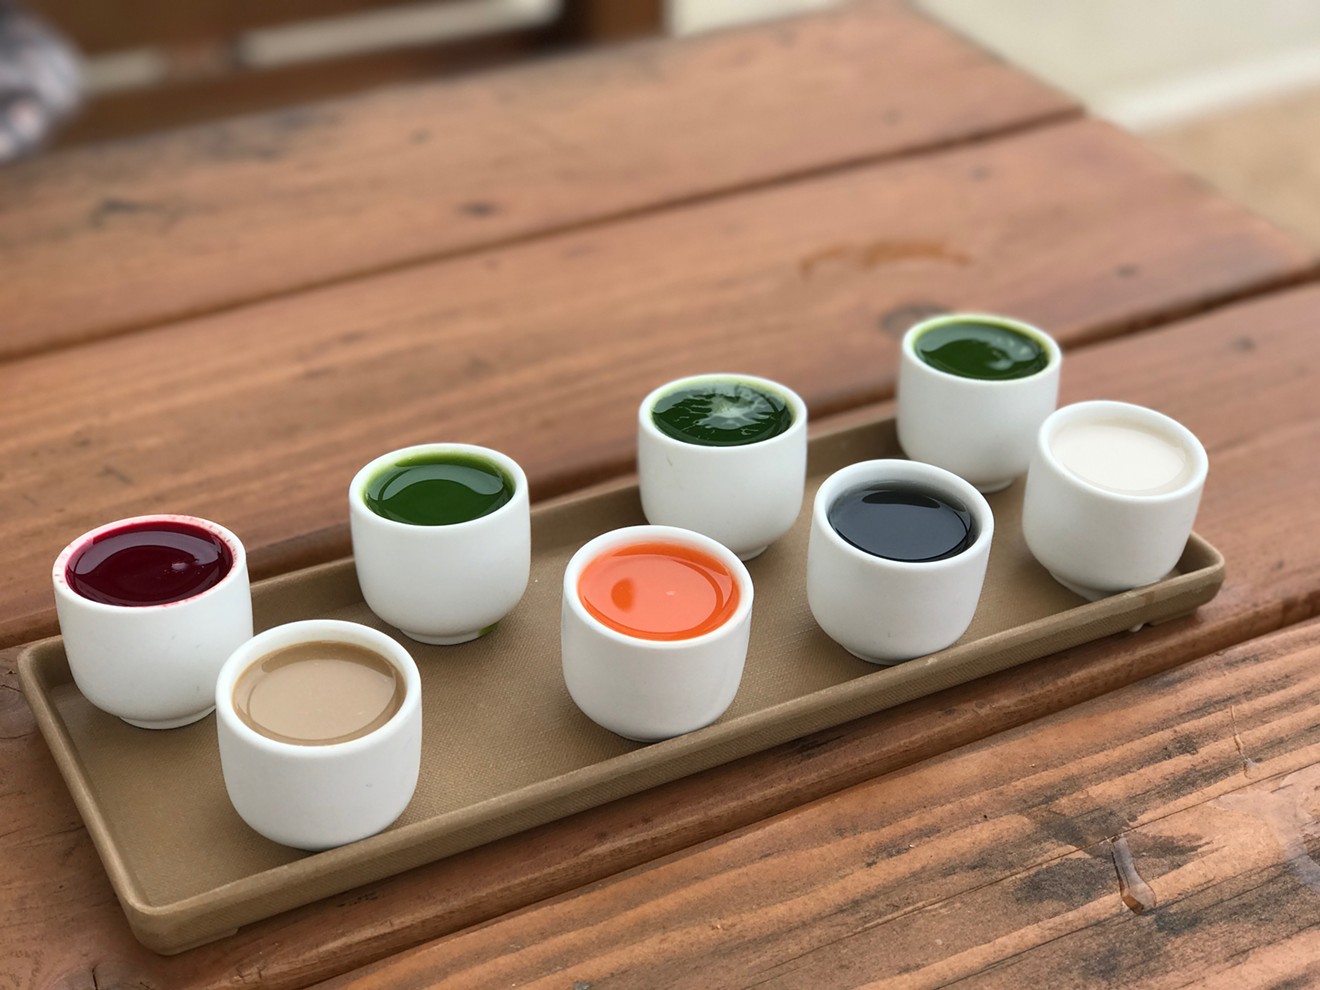 Local Press + Brew in Oak Cliff launched in 2015 as a health-conscious juice and coffee bar and now, two years later, is opening two new locations and selling juices wholesale to cafes around DFW. You can sample its offerings in a juice flight.